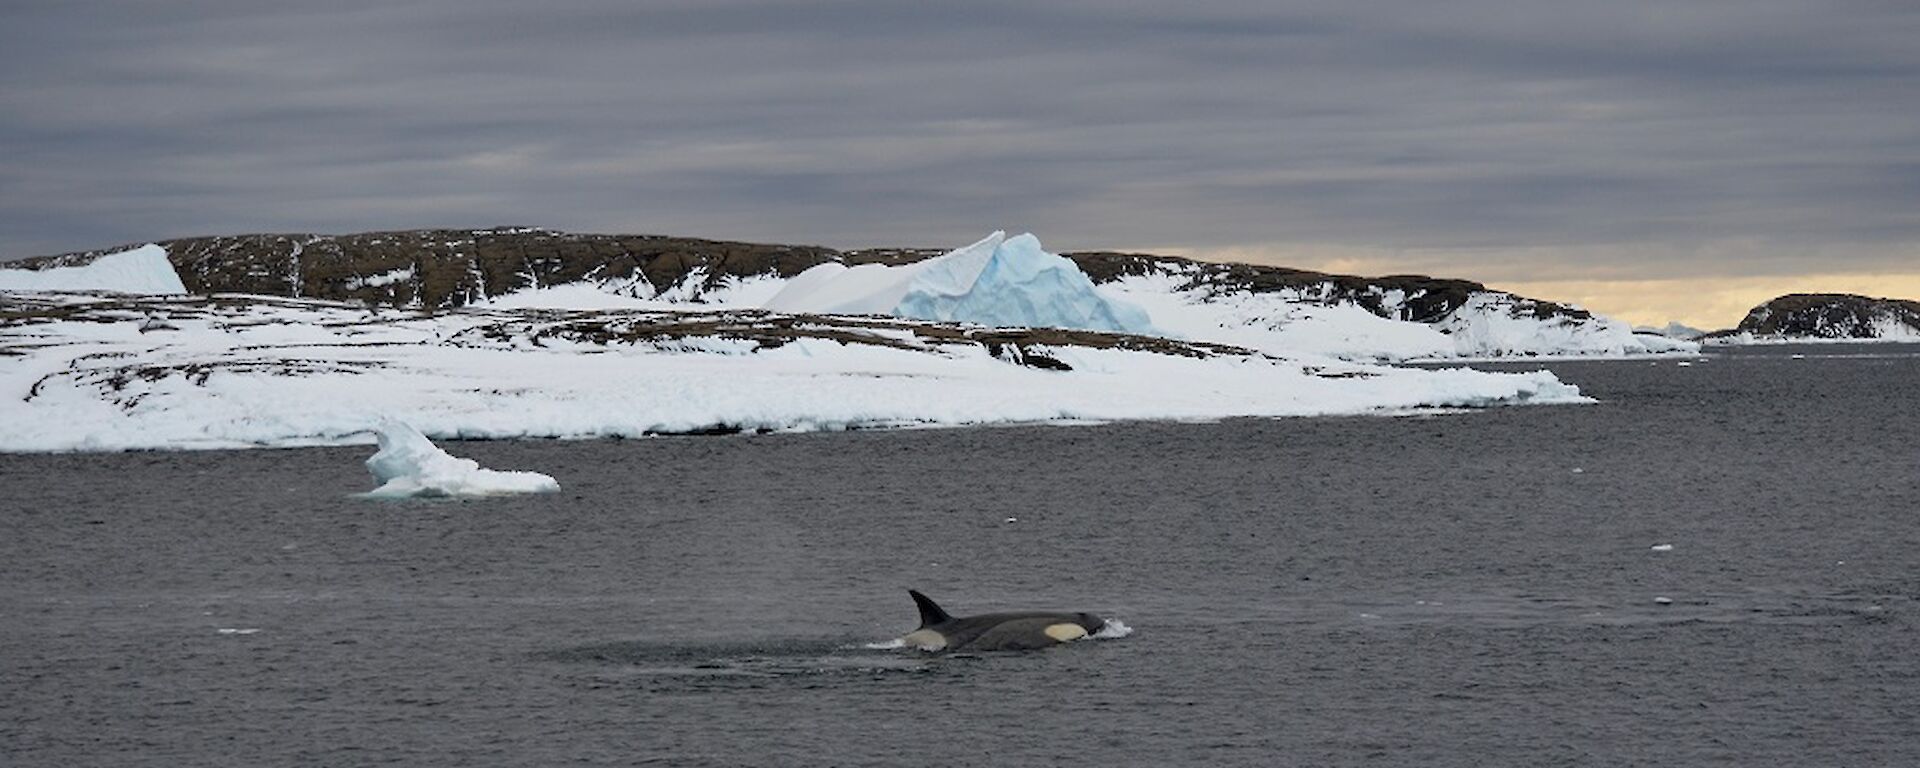 Two orcas swimming approx 20 metres off shore in front of an island covered in ice and snow